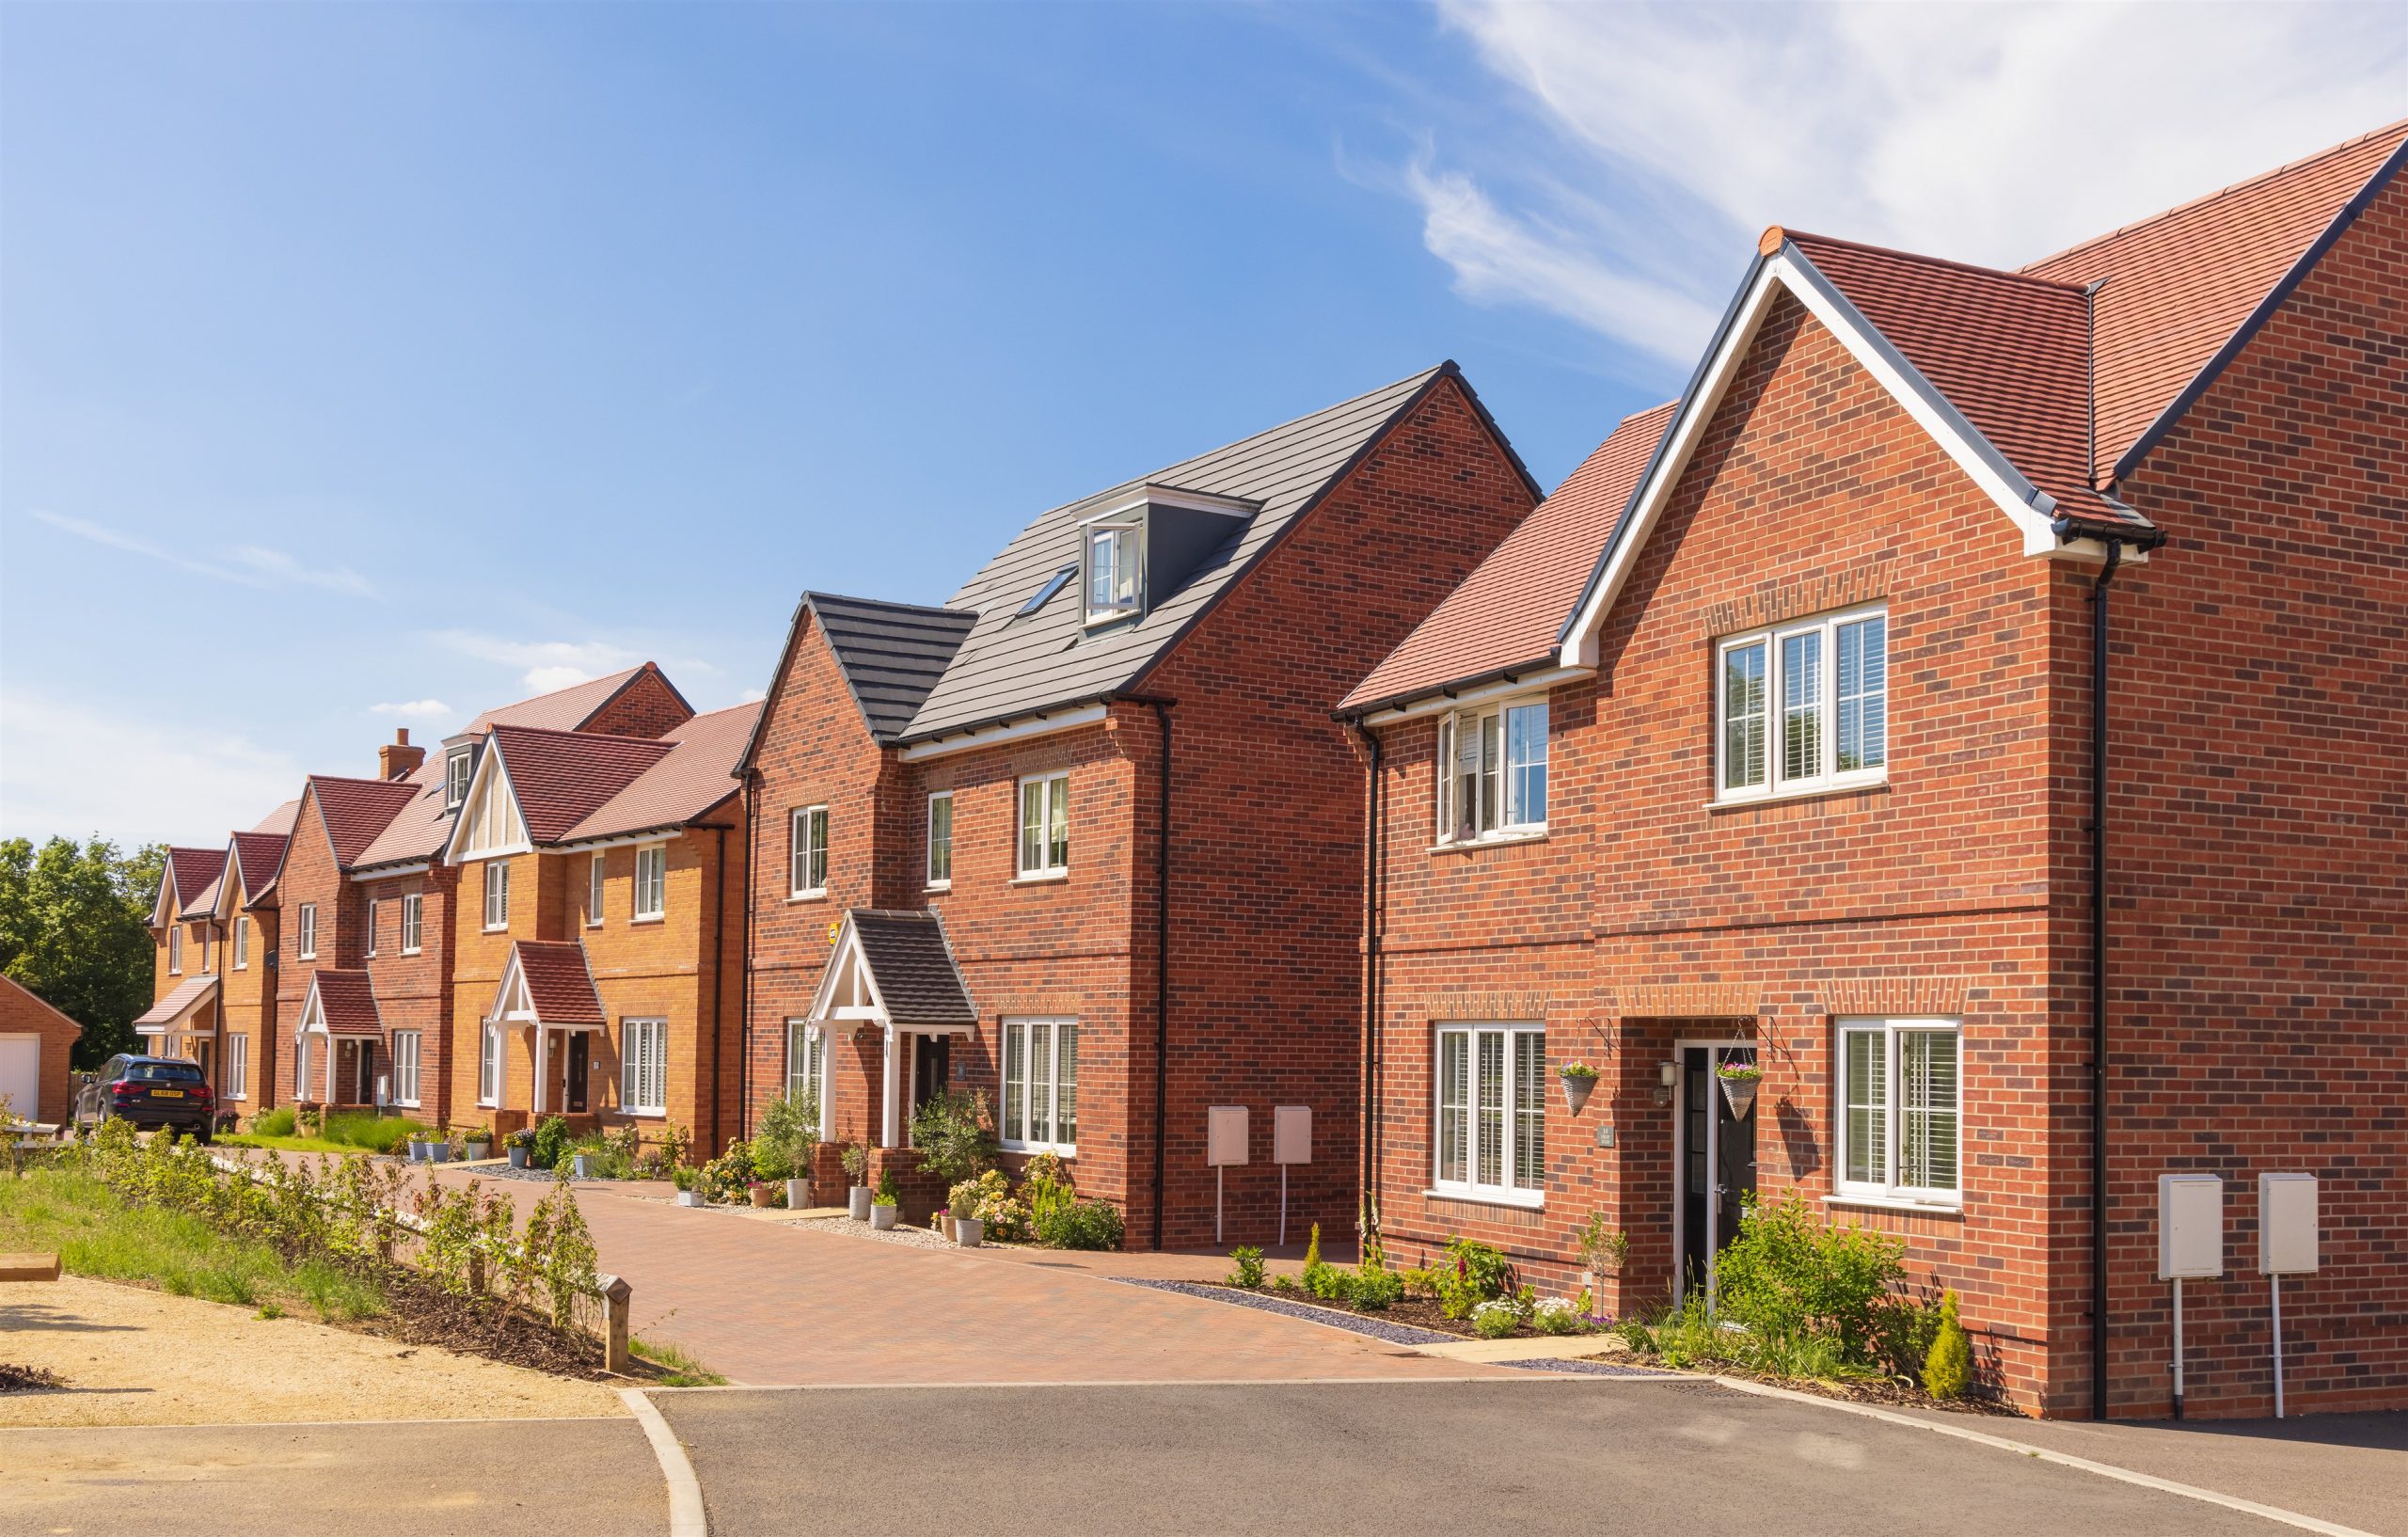 Ground Rent Ban on New Builds